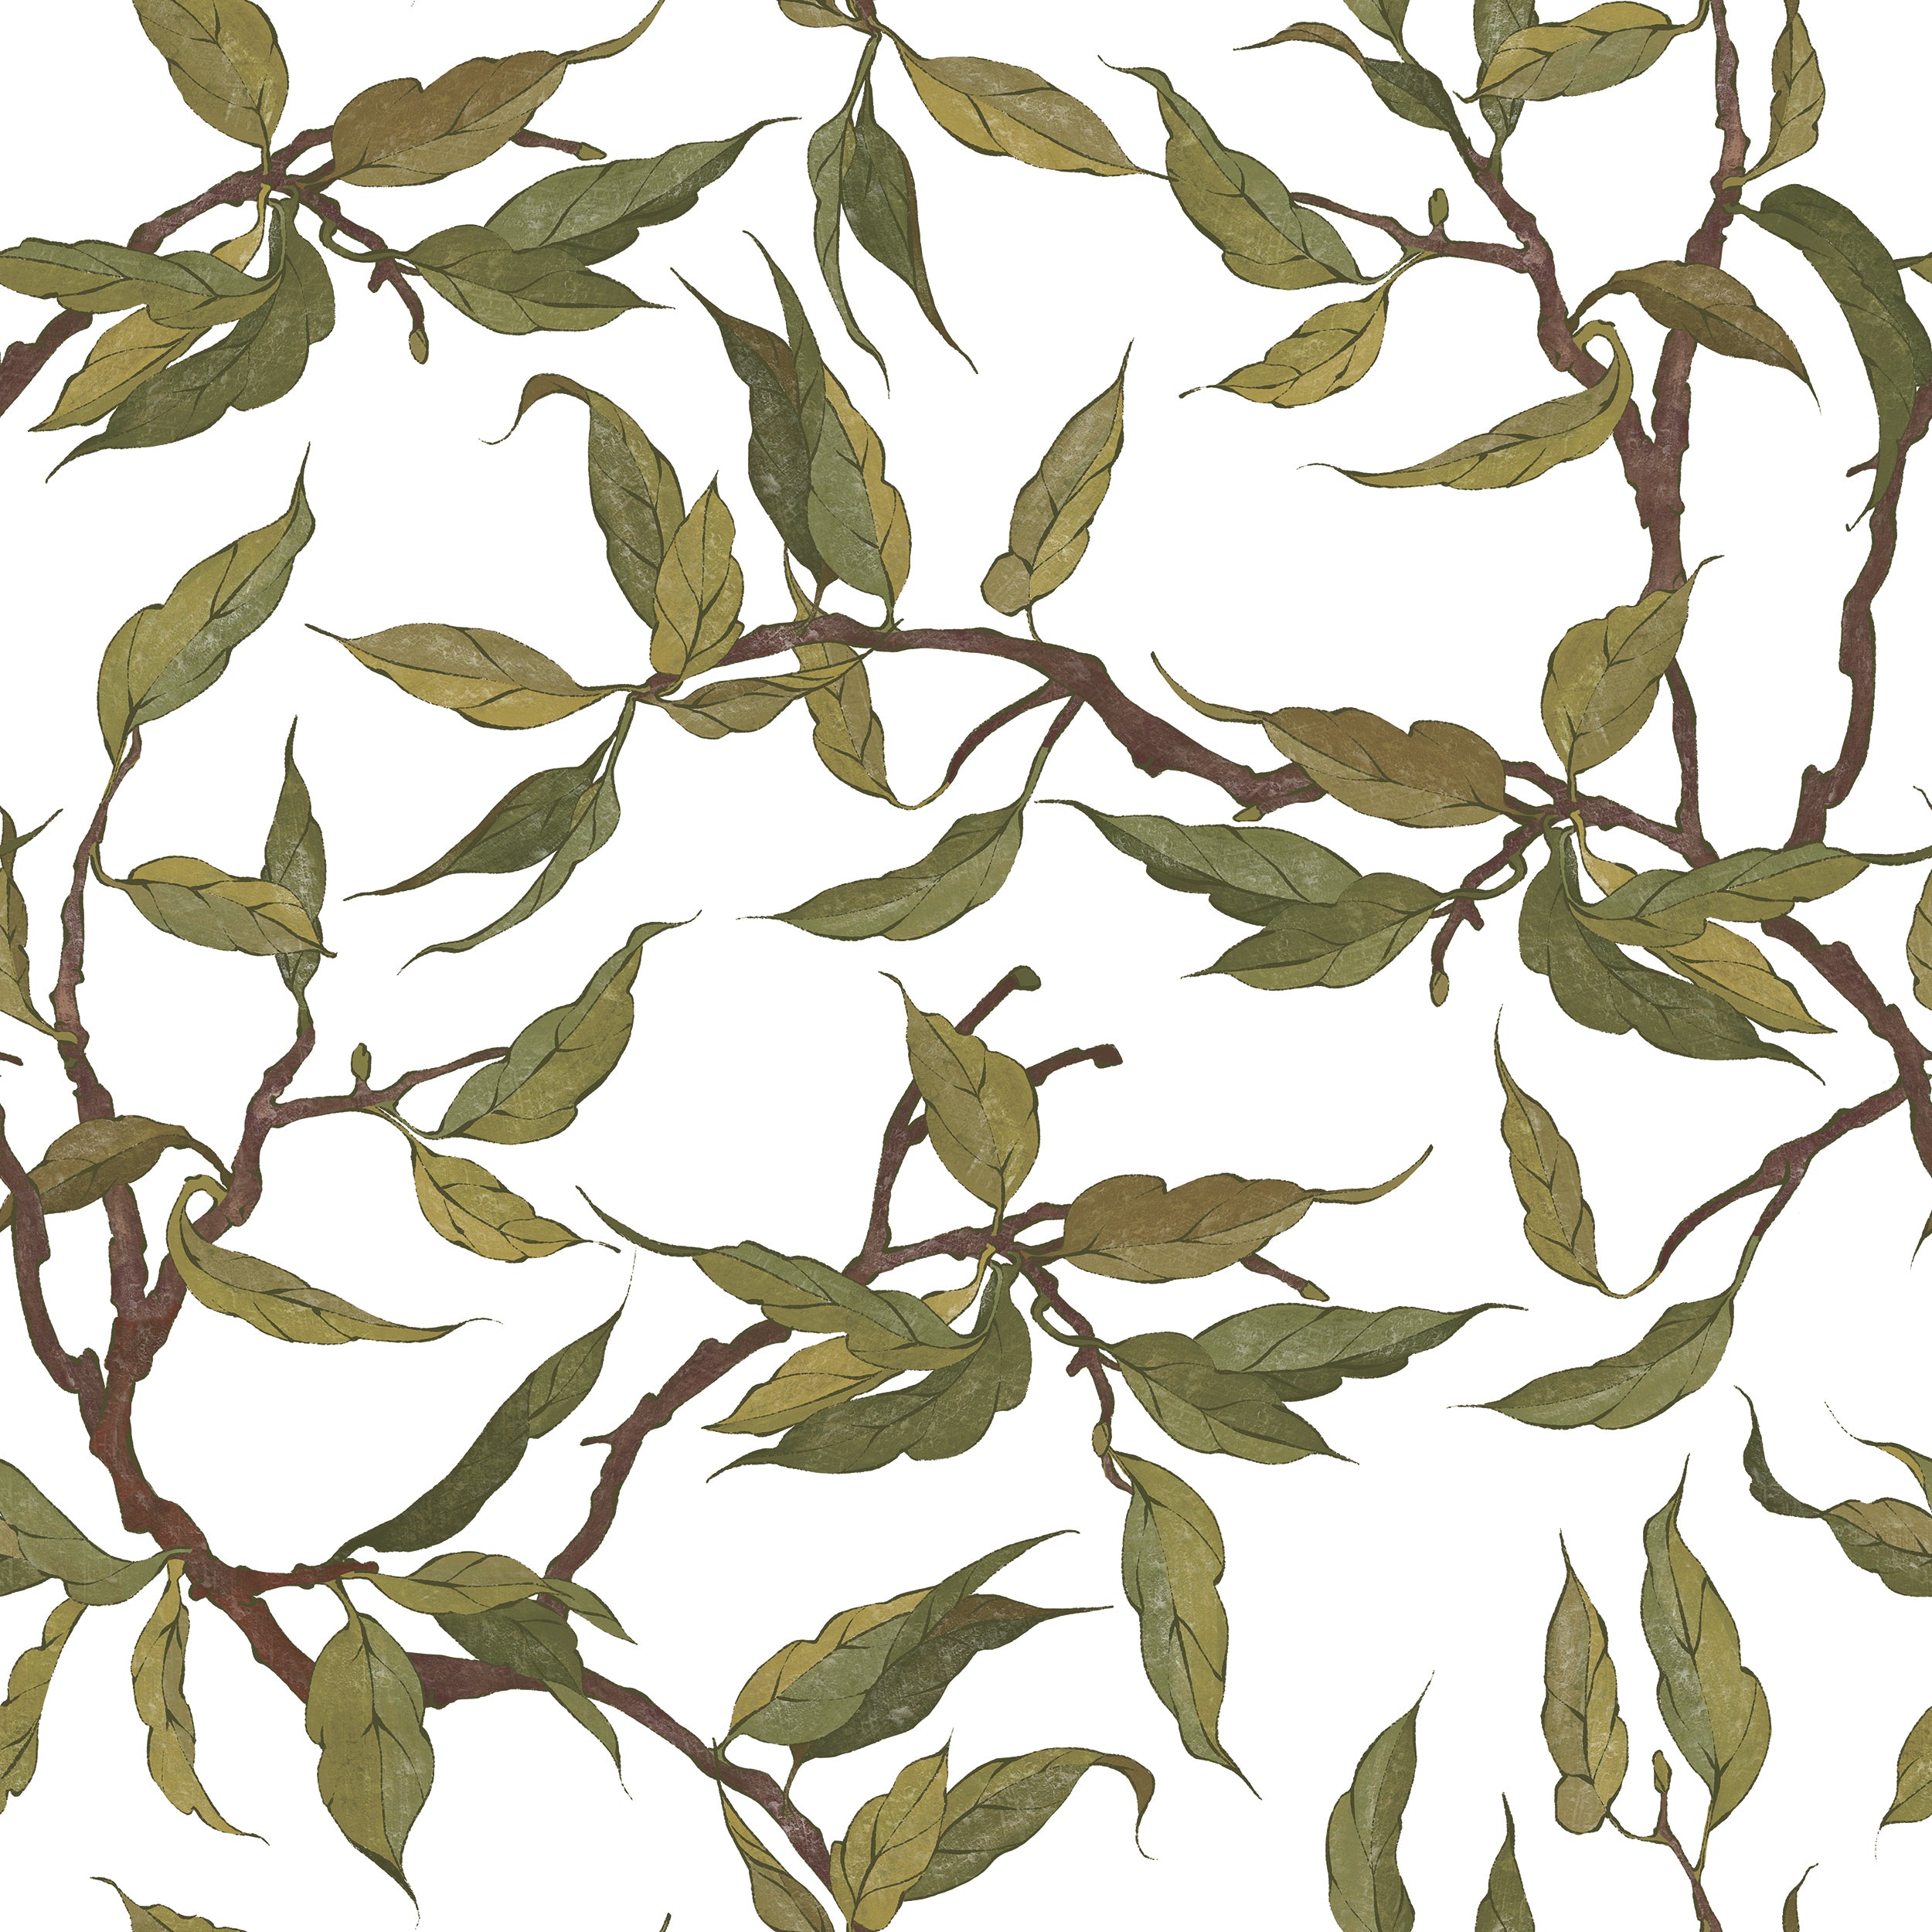 A close-up view of the Vintage Branches Wallpaper pattern, showcasing its detailed depiction of green leaves and brown branches. The design creates a vibrant and earthy atmosphere, perfect for bringing the outdoors inside.